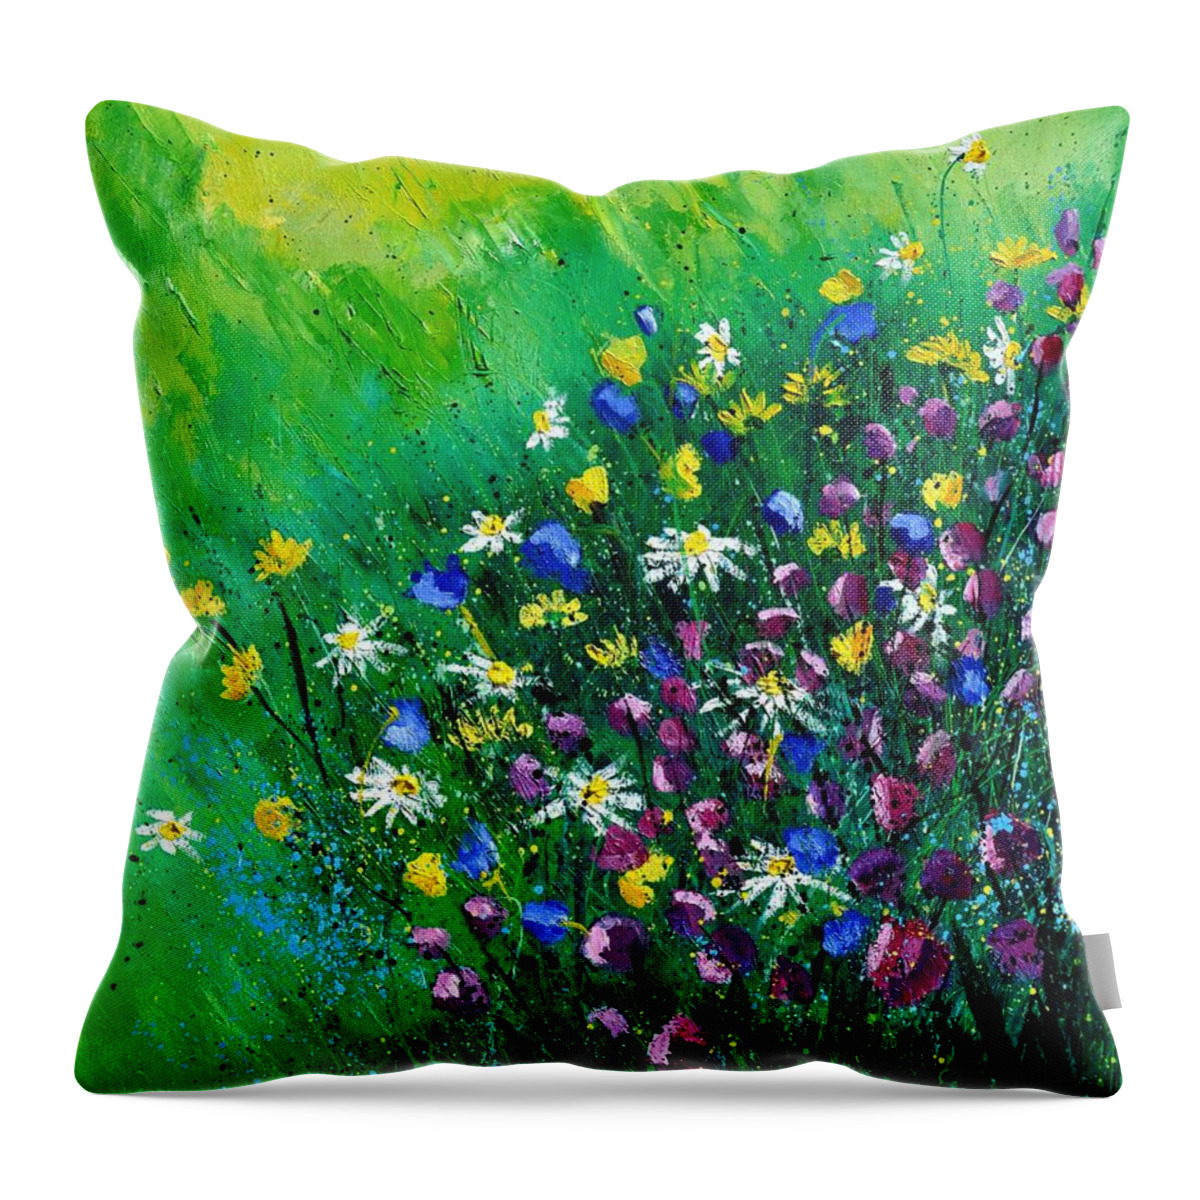 Flowers Throw Pillow featuring the painting Wild Flowers #4 by Pol Ledent